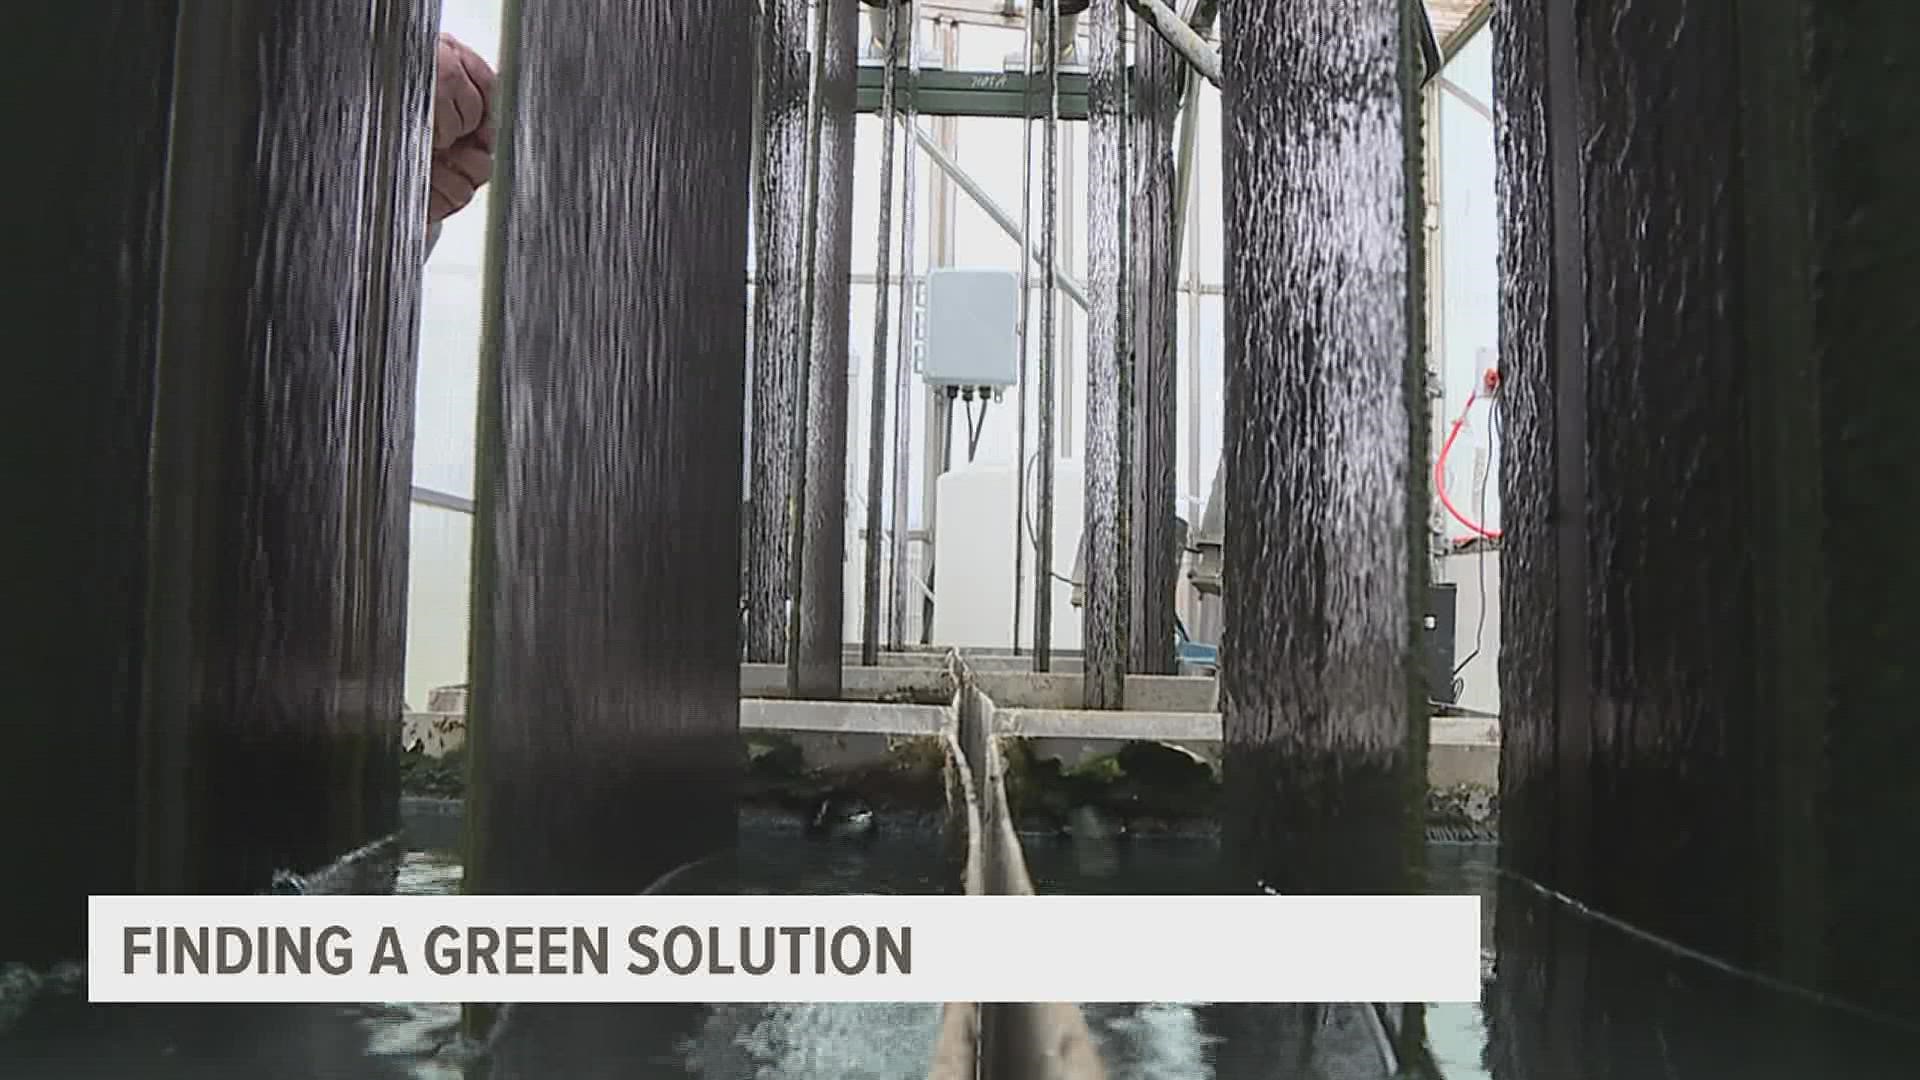 The Muscatine Water and Resource Recovery Facility is using algae to remove nitrogen and phosphorous from its wastewater.